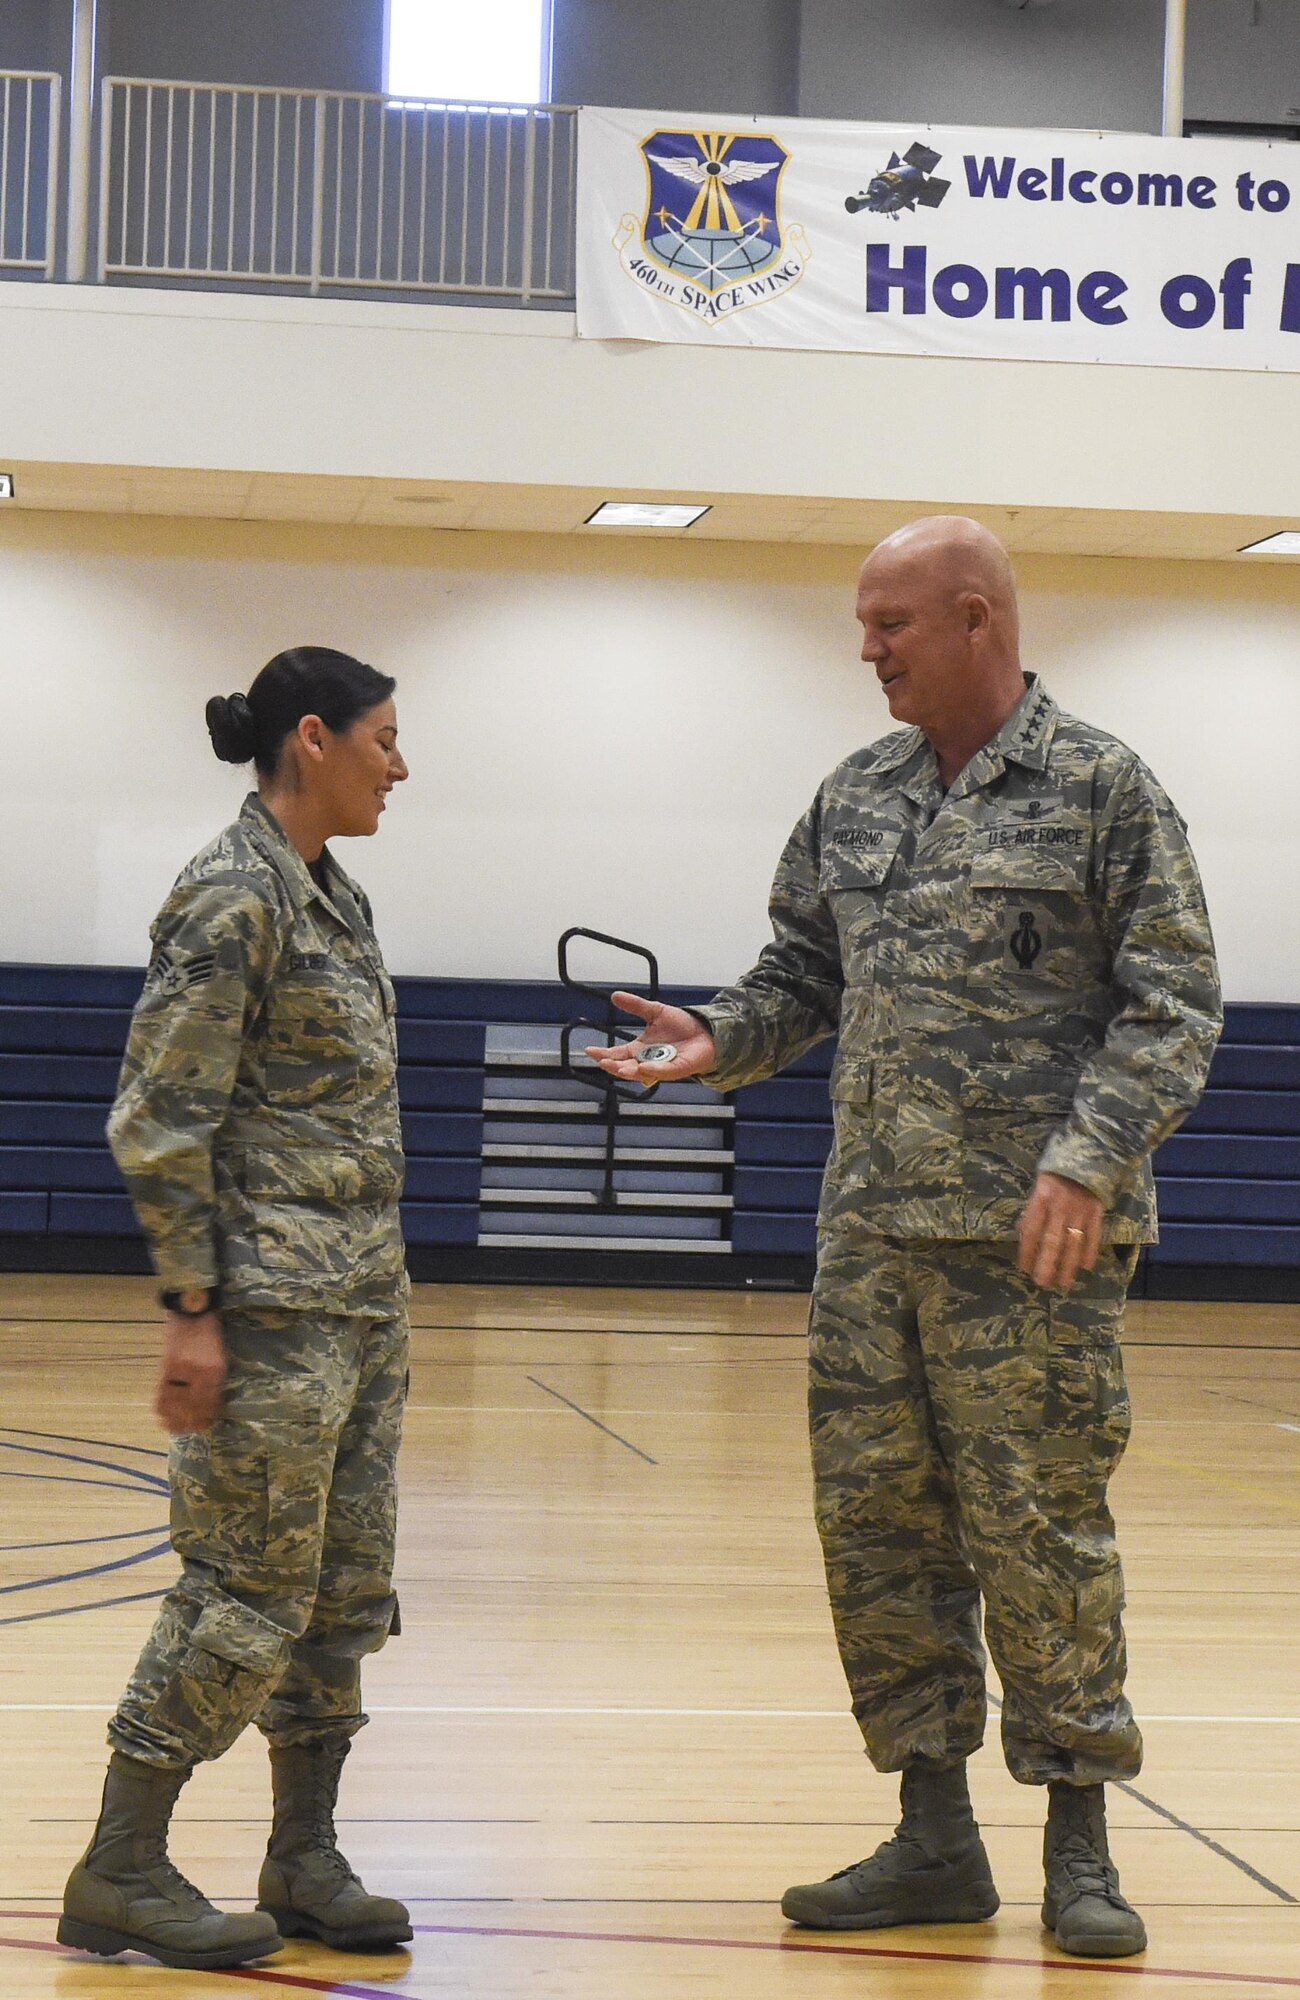 Senior Airman Sarah Gilbert, 460th Medical Group public health, left, receives a coin from Gen. Jay Raymond, commander of Air Force Space Command, for excellence March 17, 2017, at Buckley Air Force Base, Colo. Buckley boasts America’s Premier Space Wing, installation support to 95 multiservice and multinational units, a population of over 94,000 Team Buckley members, and a mission that is critical to the nation’s safety. (U.S. Air Force photo by Tech. Sgt. Nicholas Rau)